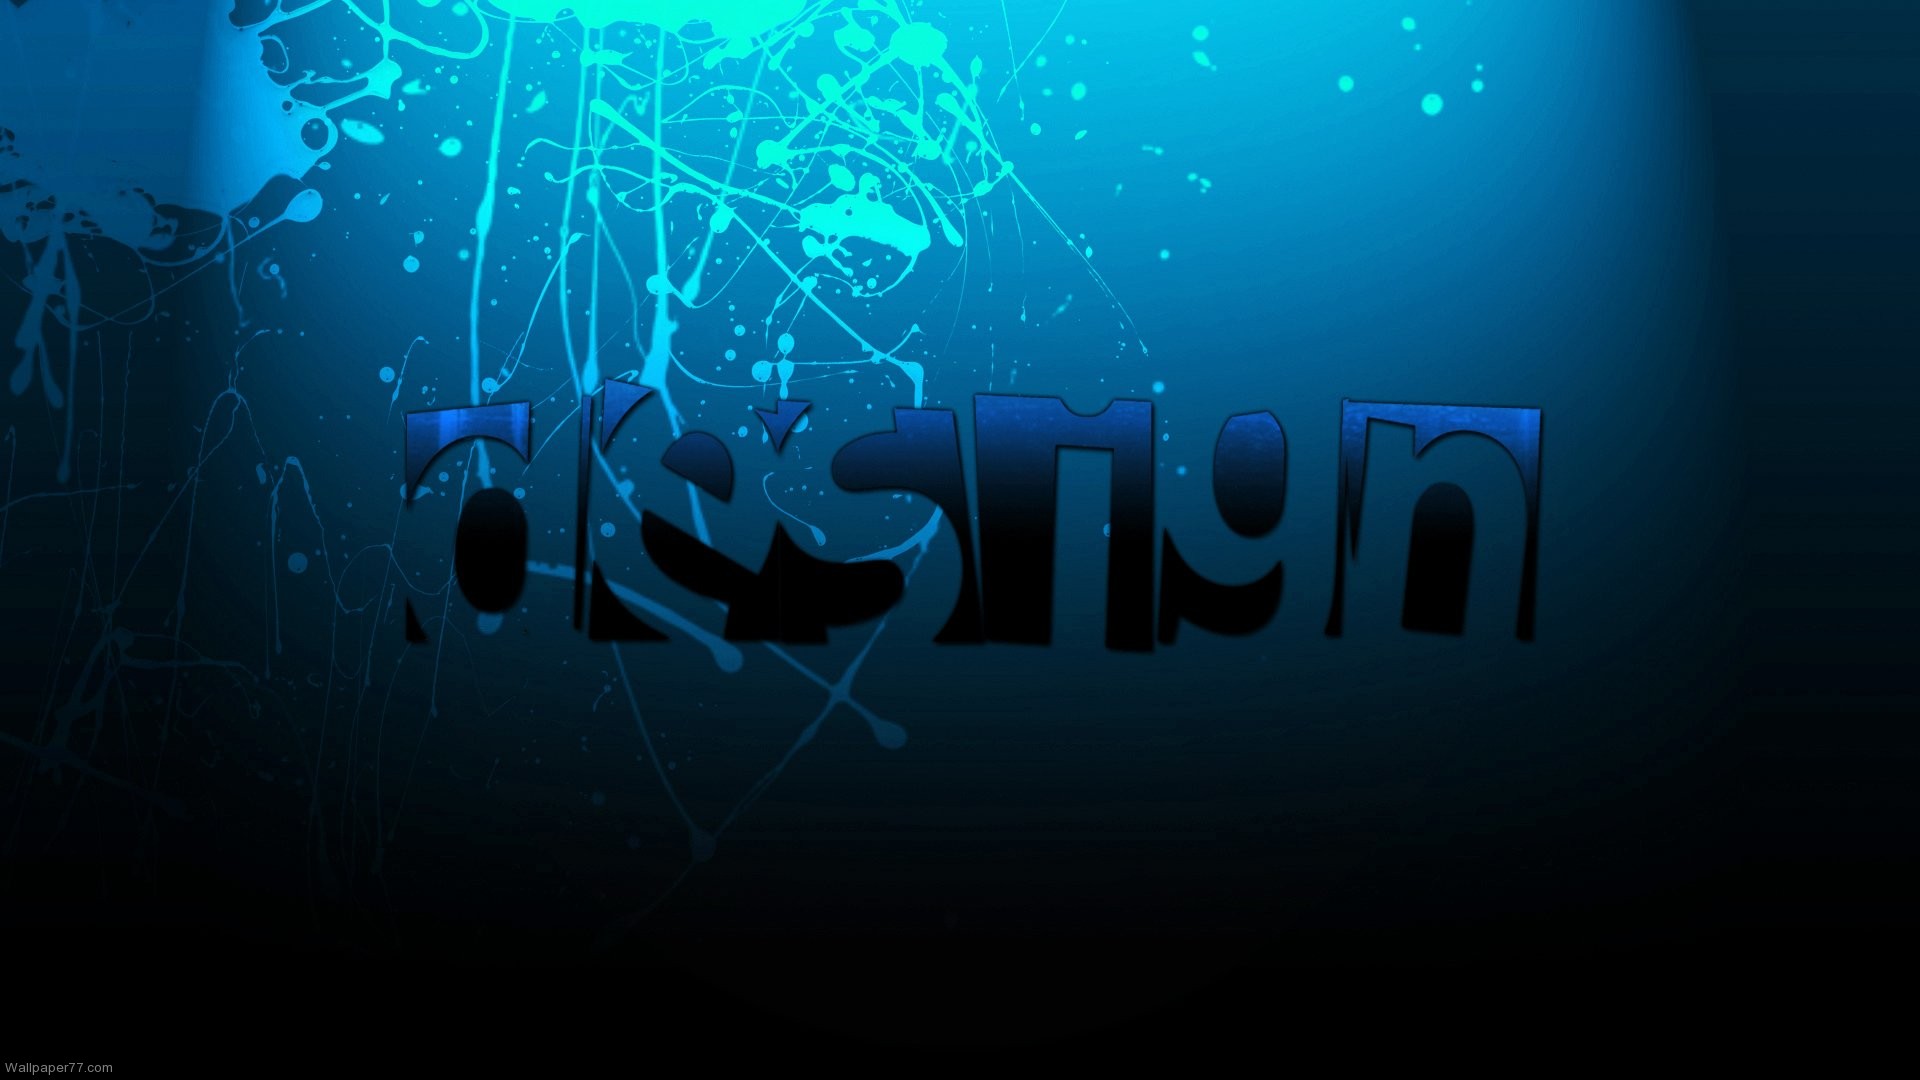 Design Style, 1920x1080 pixels : Wallpapers tagged Abstract ...